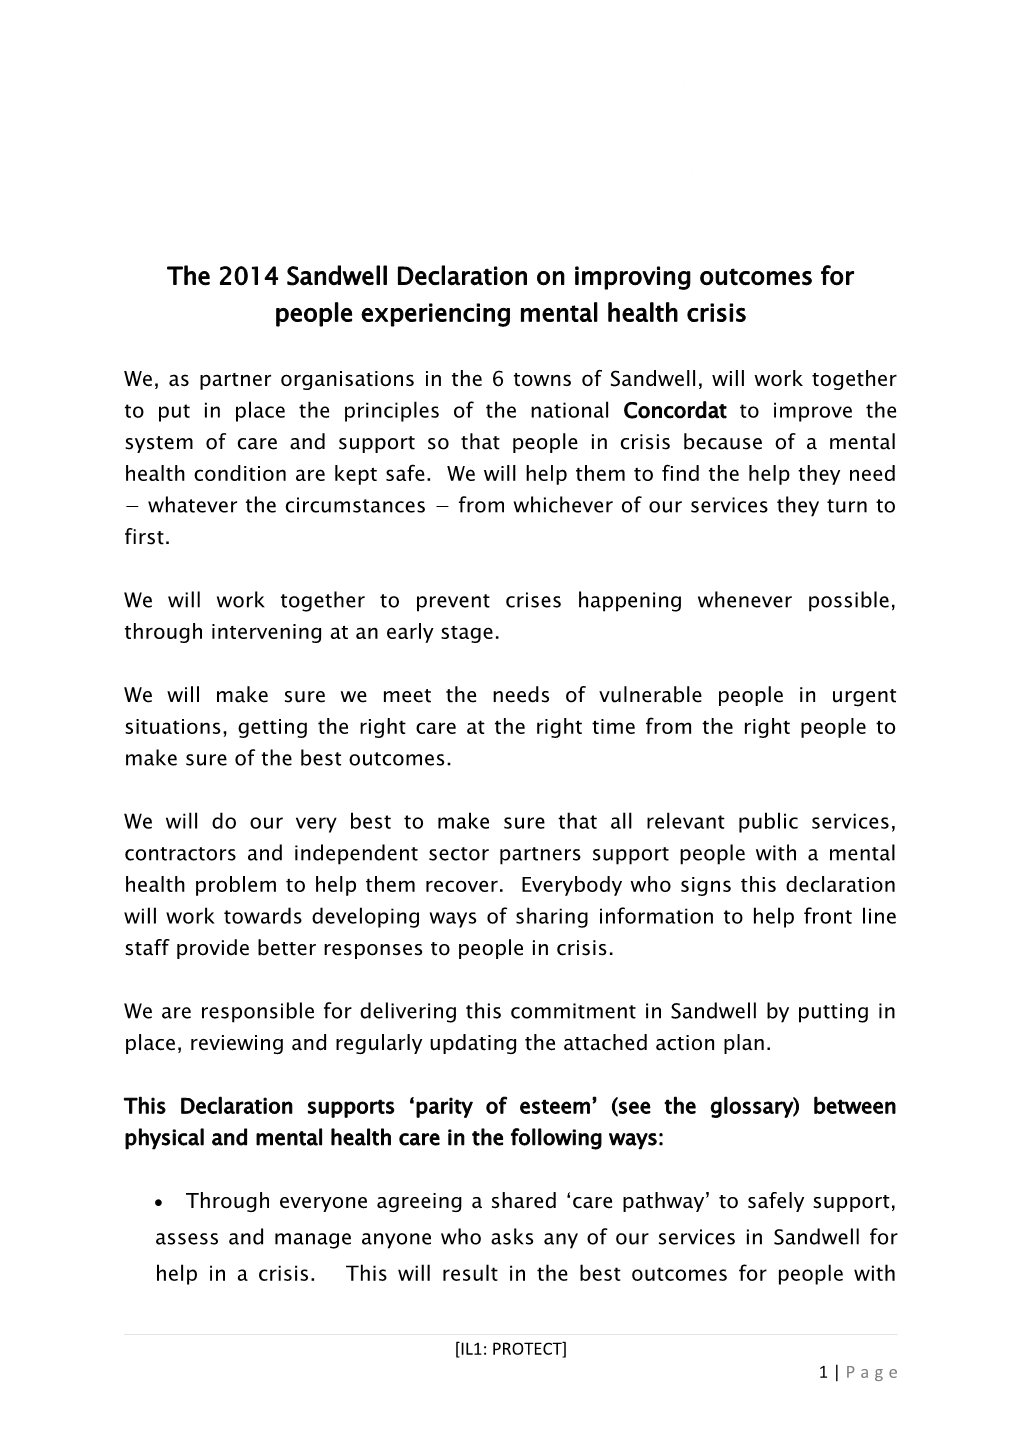 The 2014 Sandwell Declaration on Improving Outcomes for People Experiencing Mental Health Crisis